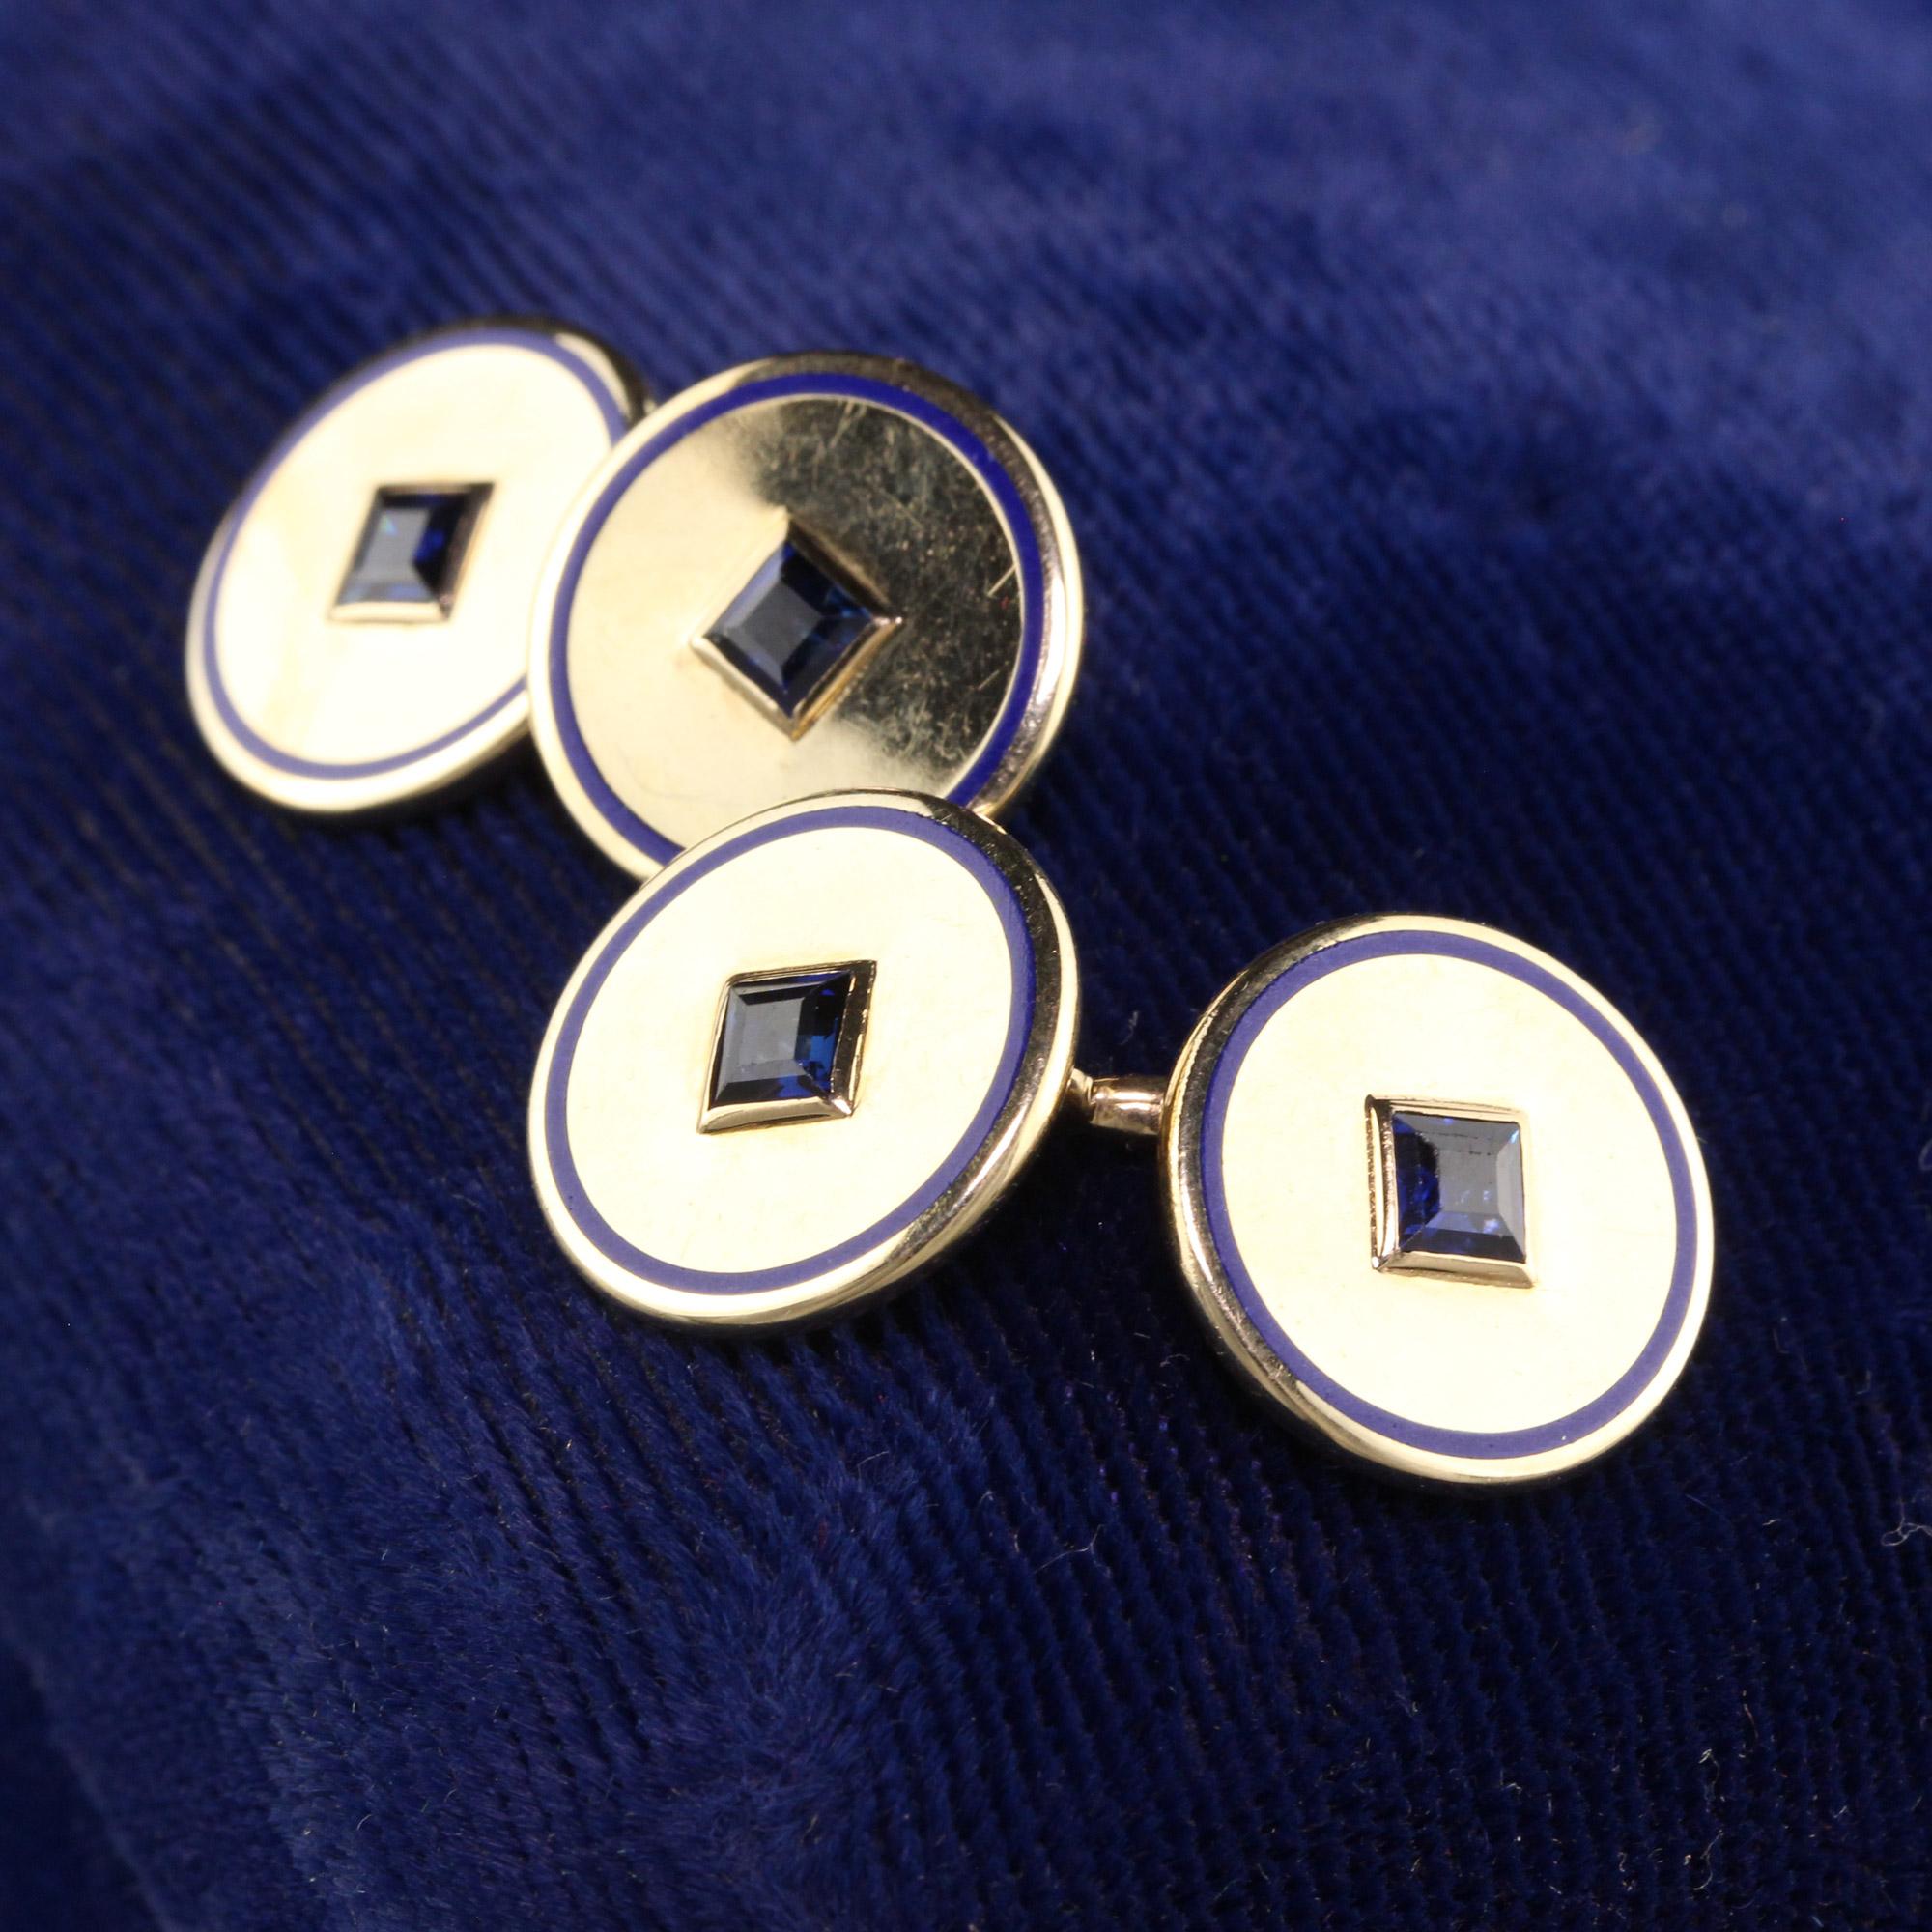 Beautiful Retro Cartier 14K Yellow Gold Sapphire and Enamel Round Cufflinks. This beautiful set of cufflinks are crafted in 14K yellow gold. The cufflinks are in great condition and have blue enamel going around the top with a beautiful natural blue